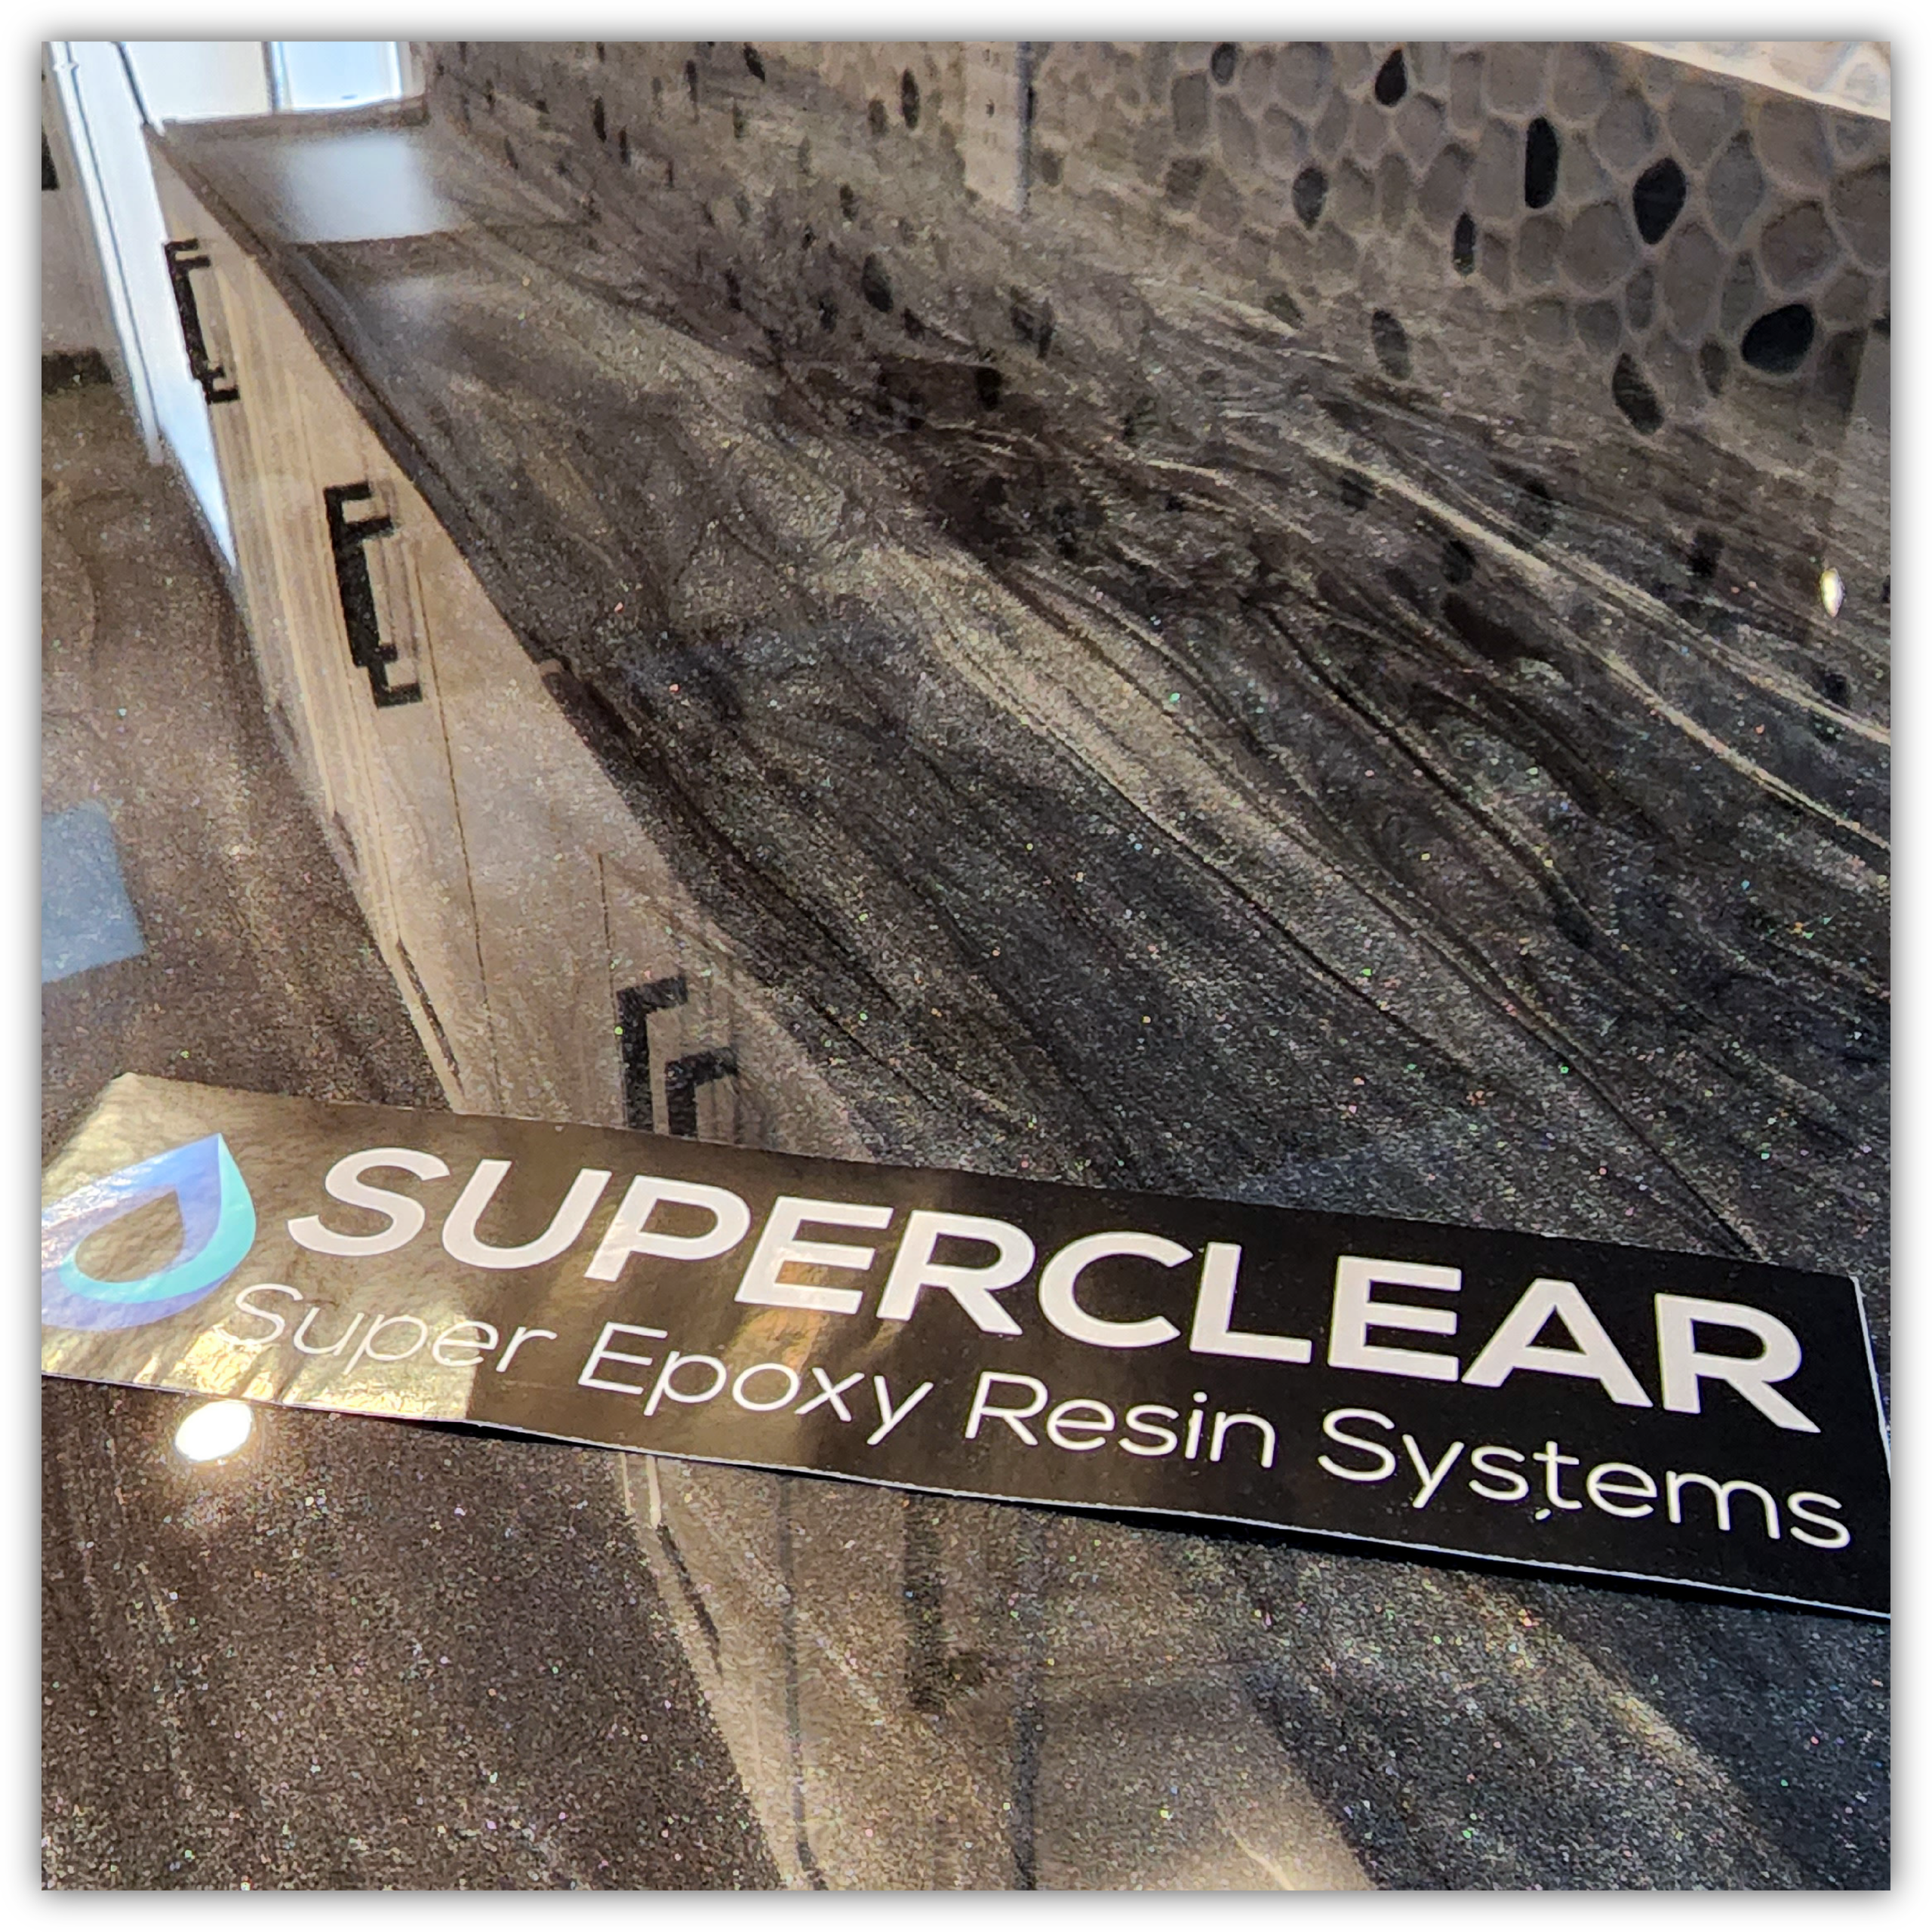 DIY Do-It-Yourself Epoxy - Superclear Epoxy Resin Systems